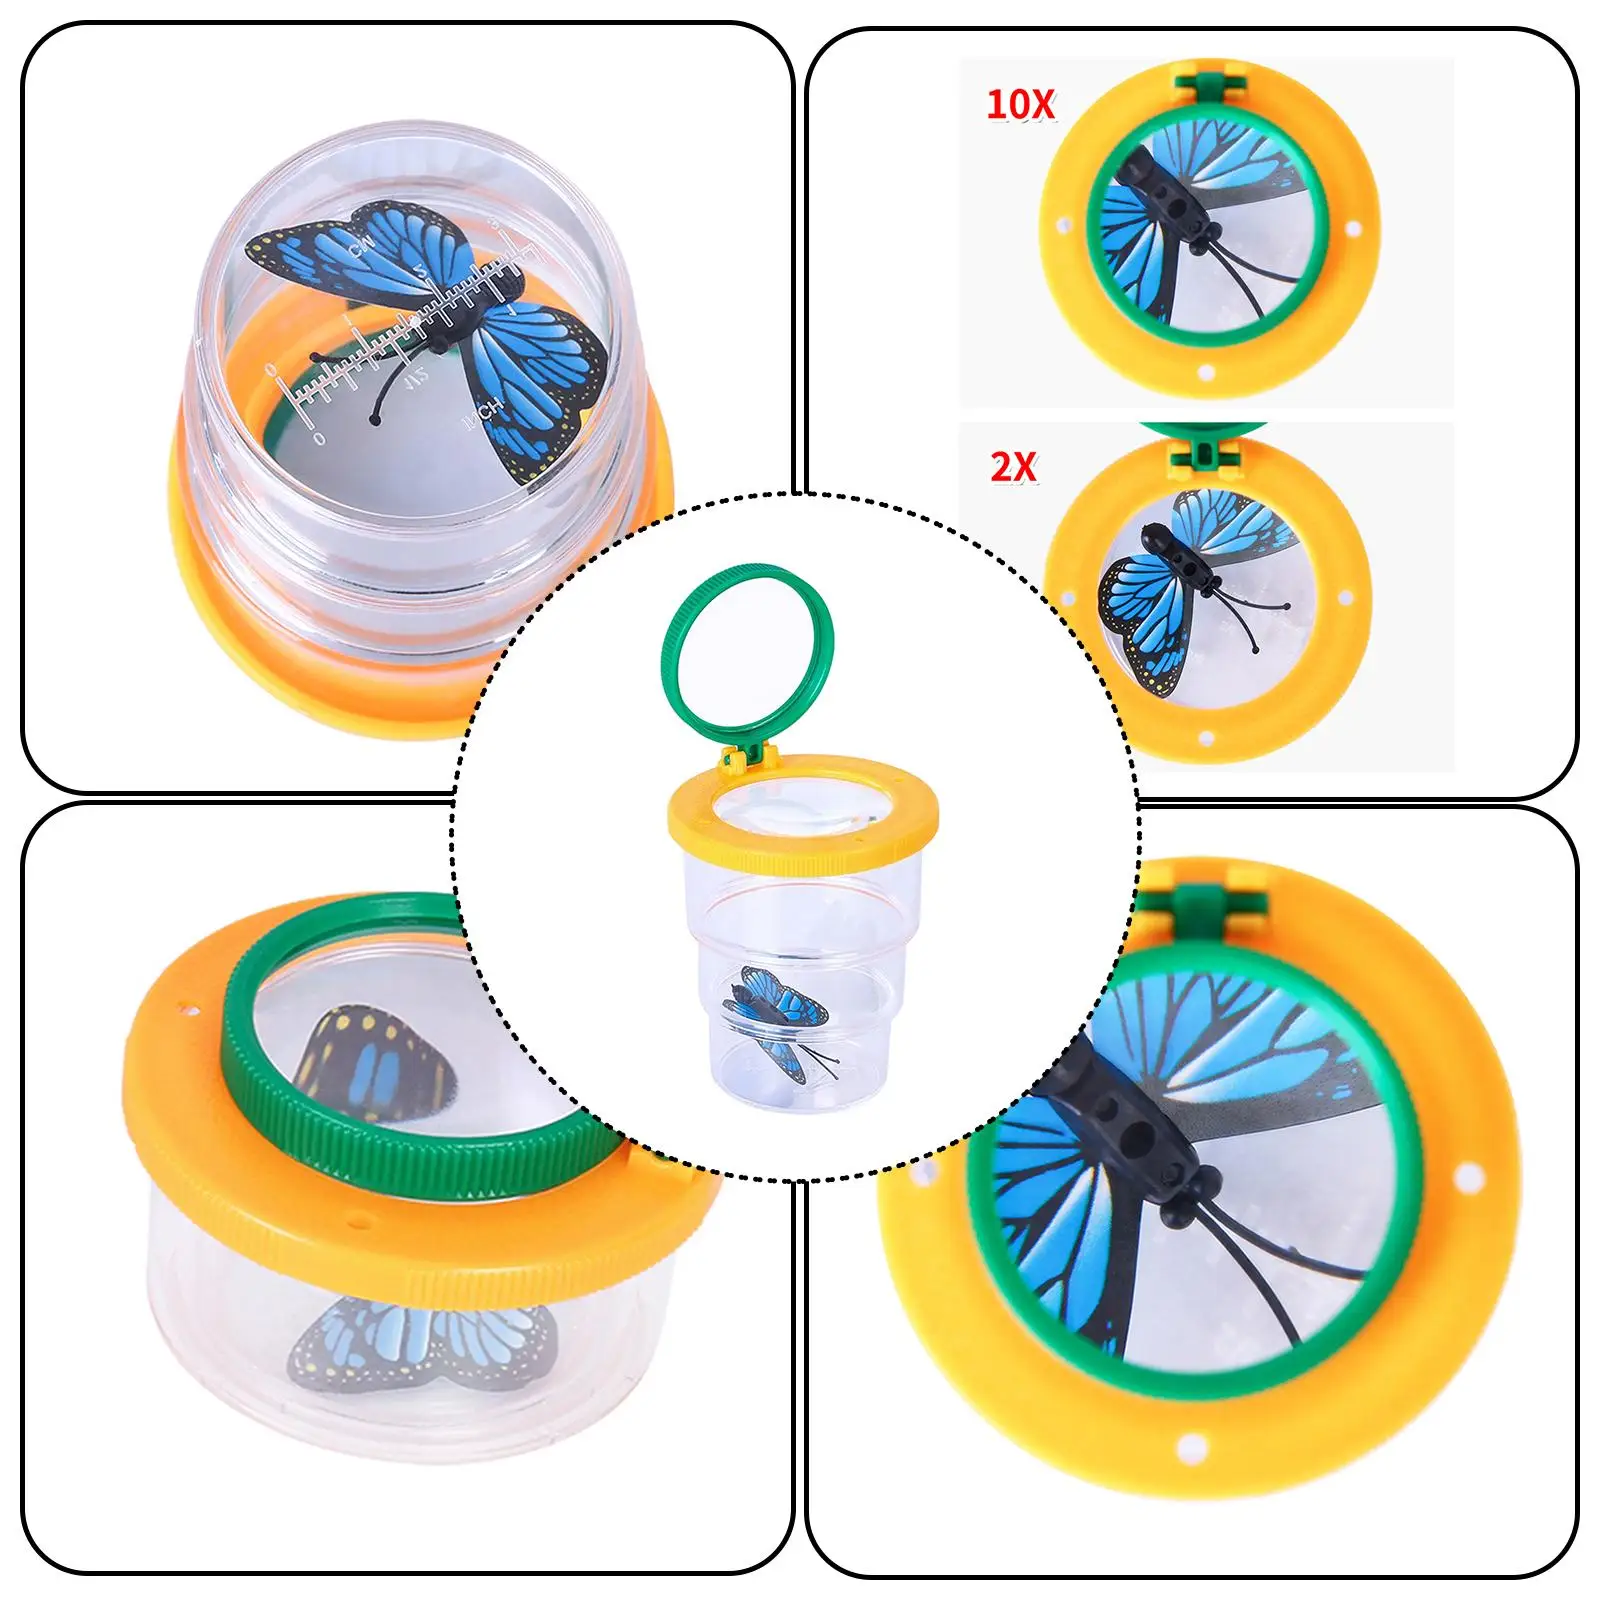 Insect Magnifier Viewing Observation Toy Observer Case for Children Holiday Gifts